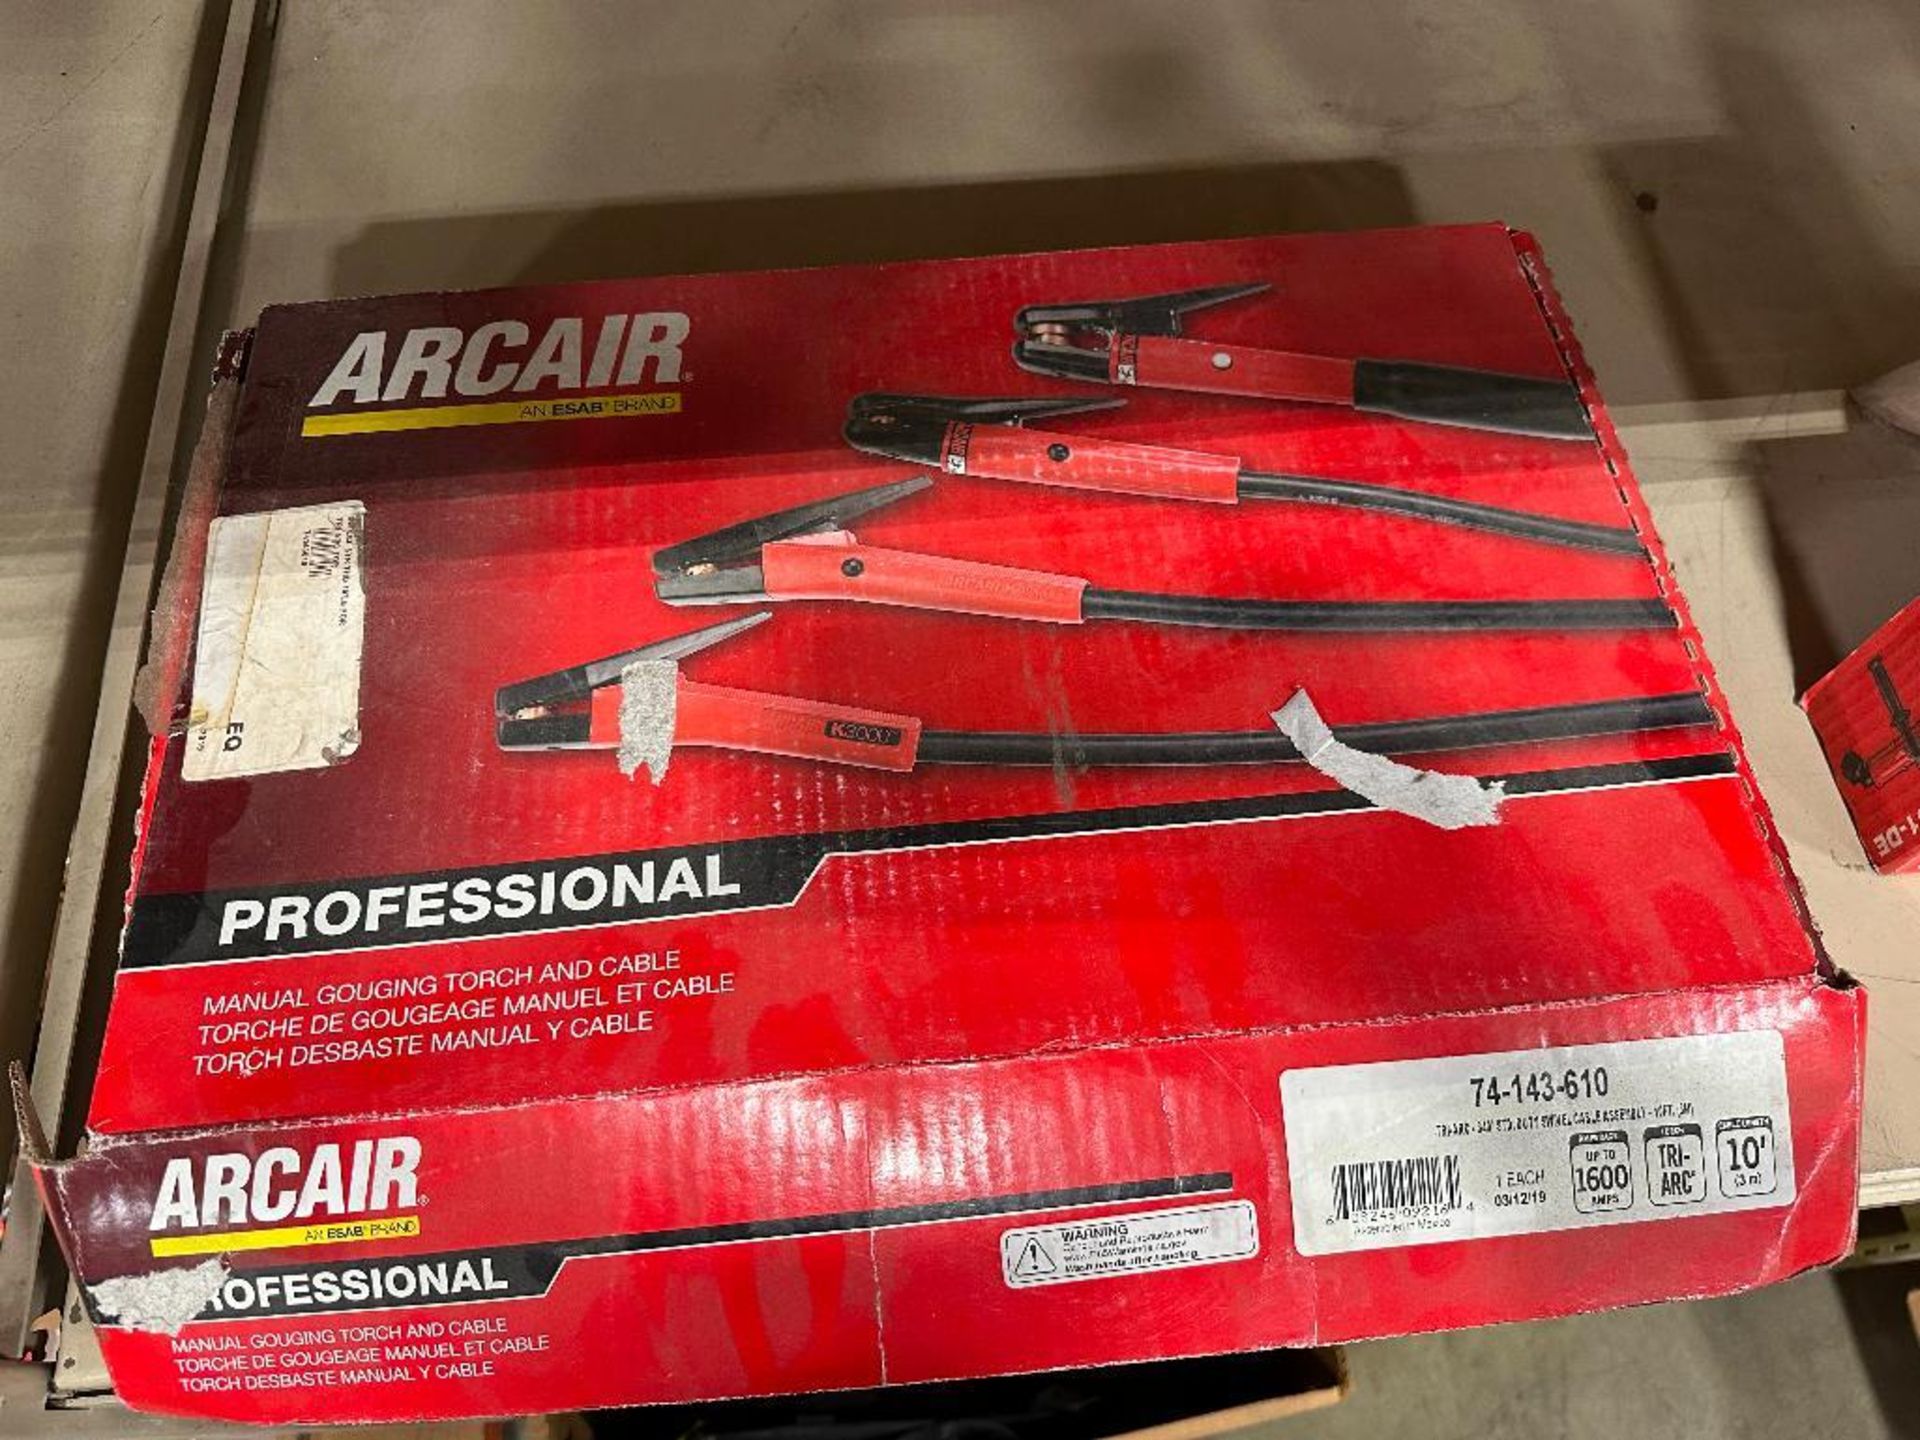 ARCAIR Professional Cable - Image 3 of 4